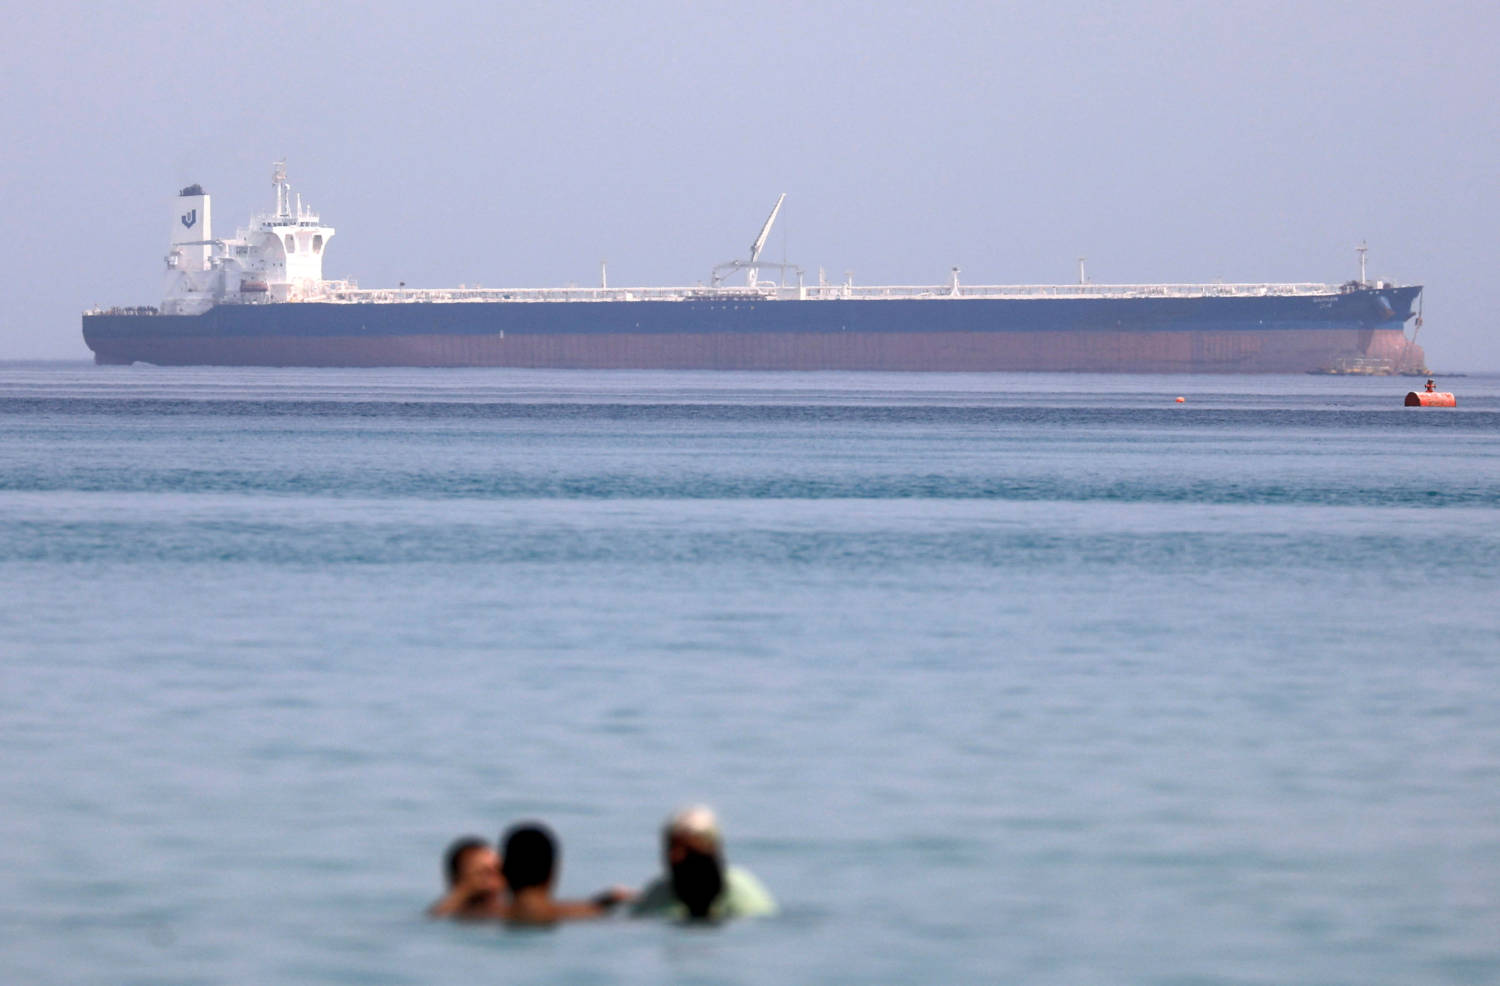 File Photo: A Tanker Crosses The Gulf Of Suez Towards The Red Sea Before Entering The Suez Canal, In El Ain El Sokhna